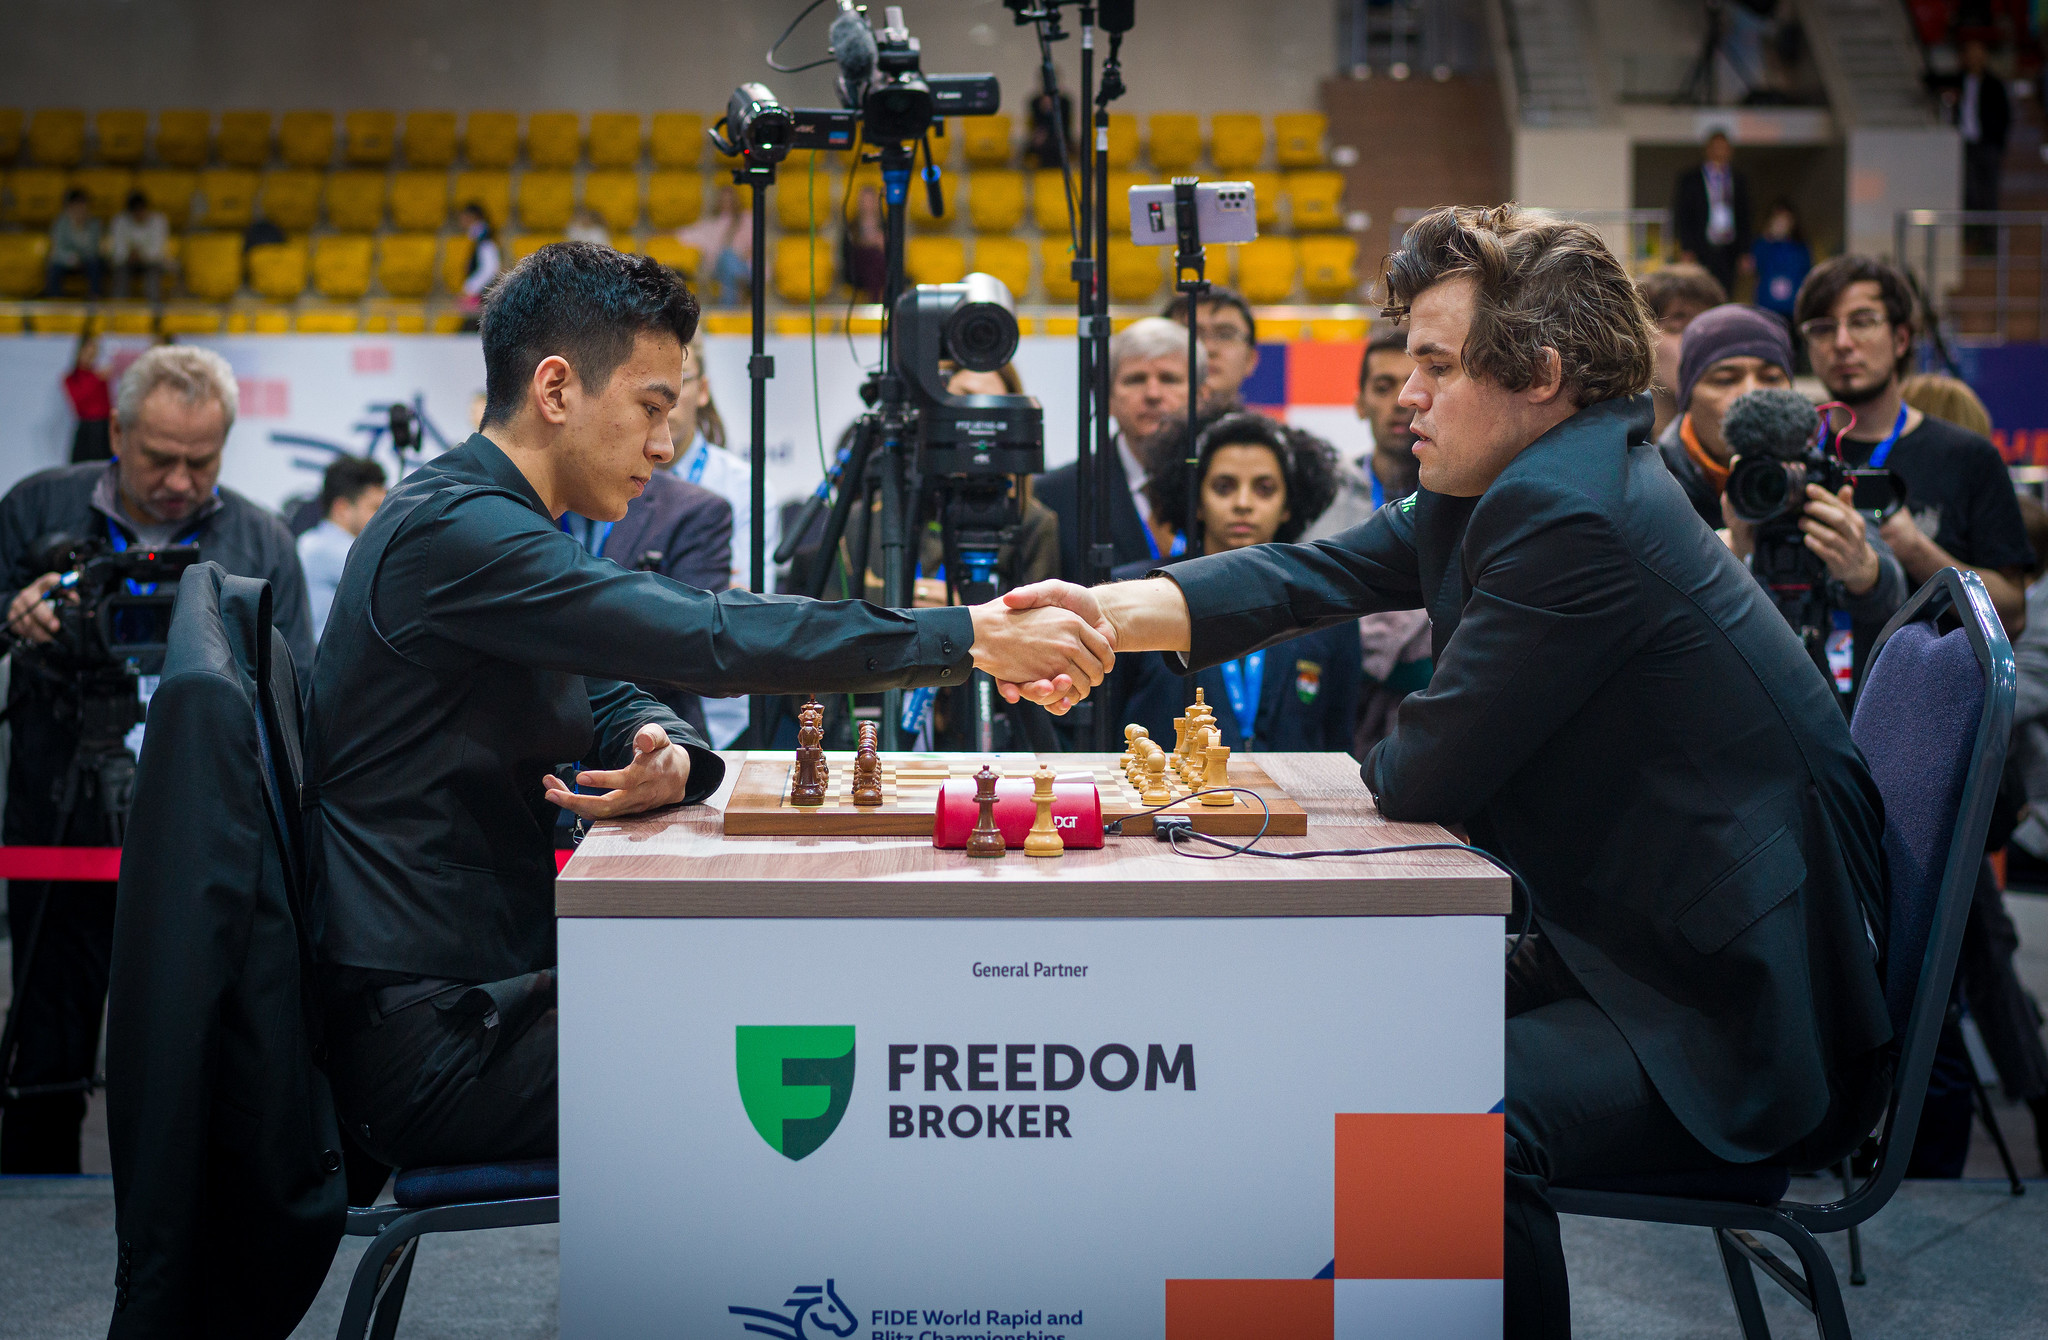 FIDE has signed a historic global partnership agreement with Chessable,  making it one of the sponsors for the World Chess Championship cycle, the  Olympiad, and the World Rapid and Blitz.